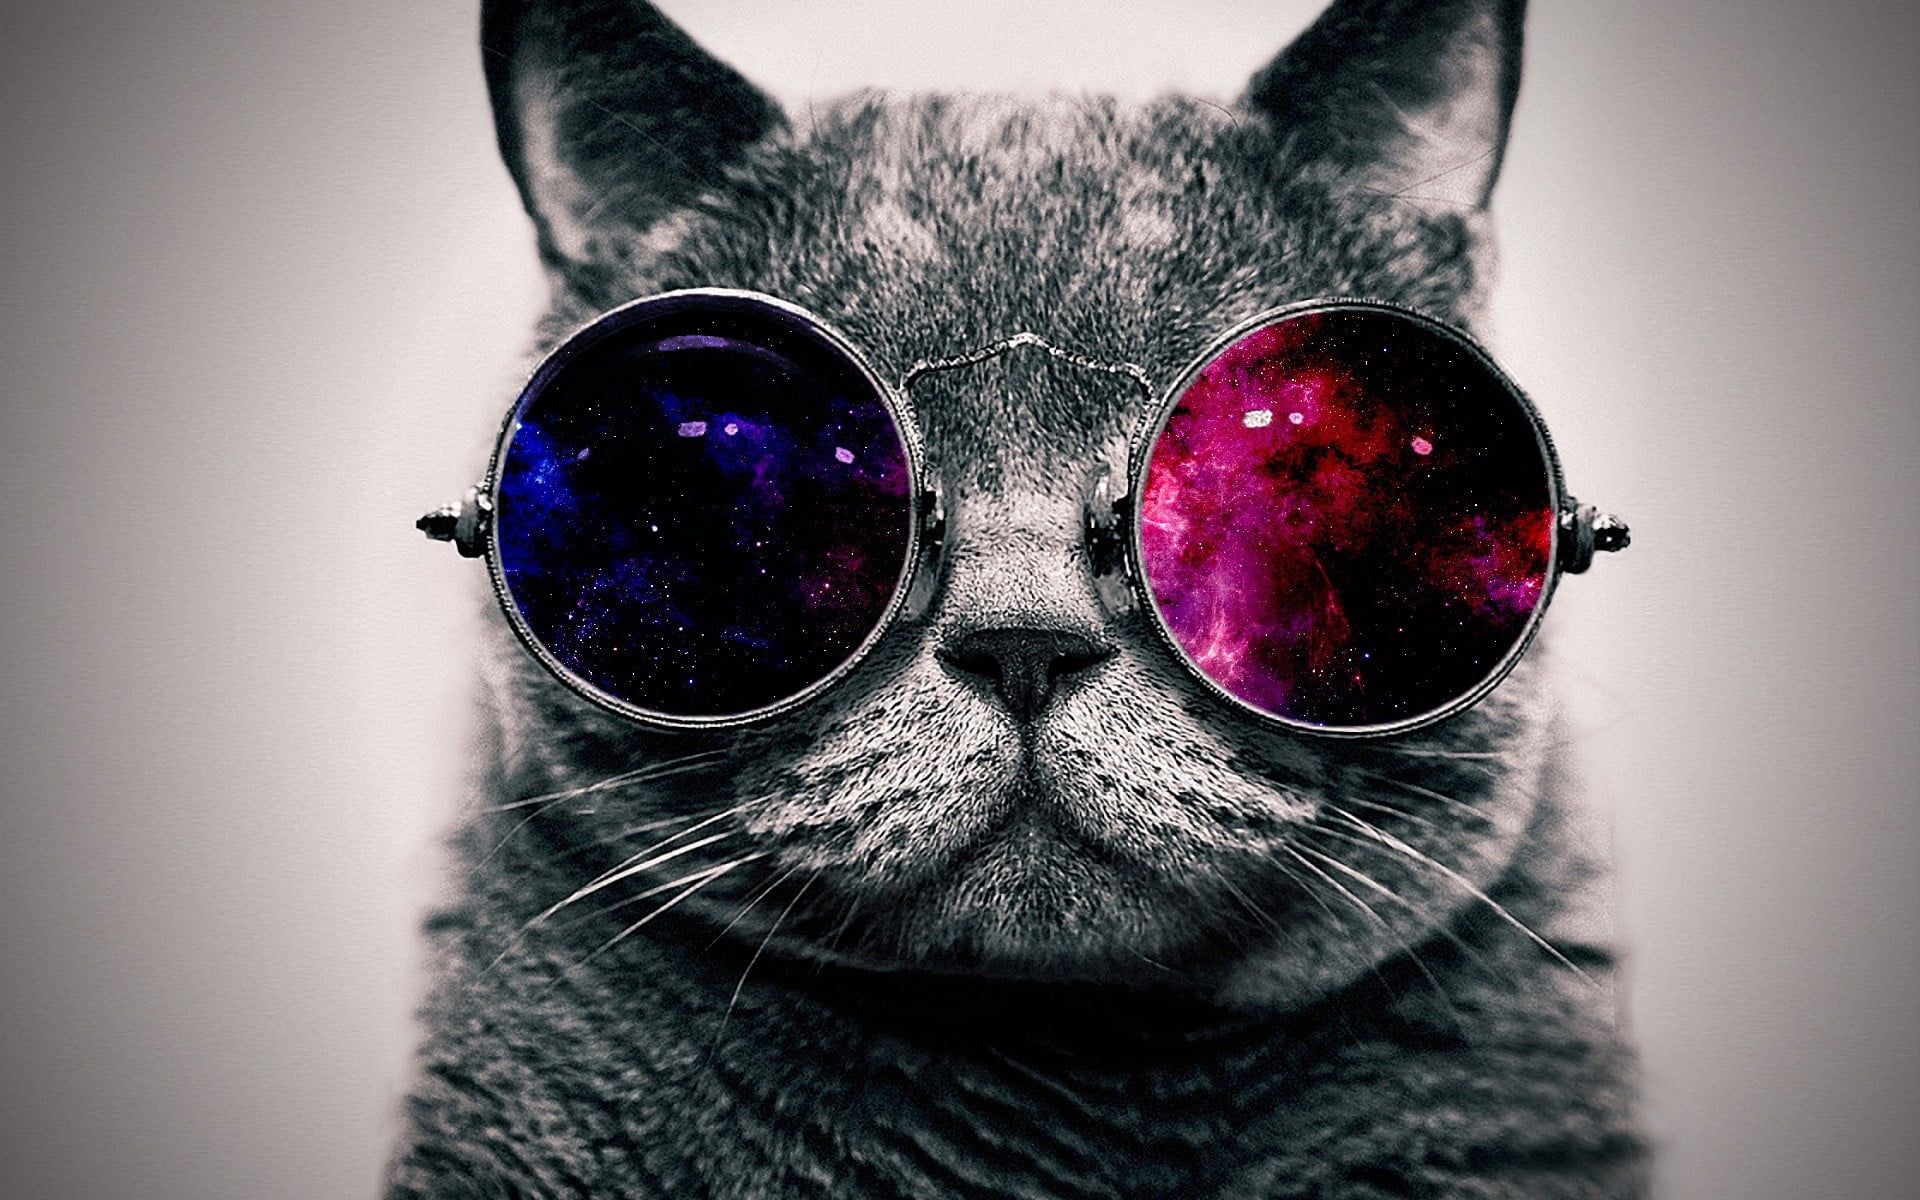 grey cat and sunglasses, space, abstract, minimalism, animals